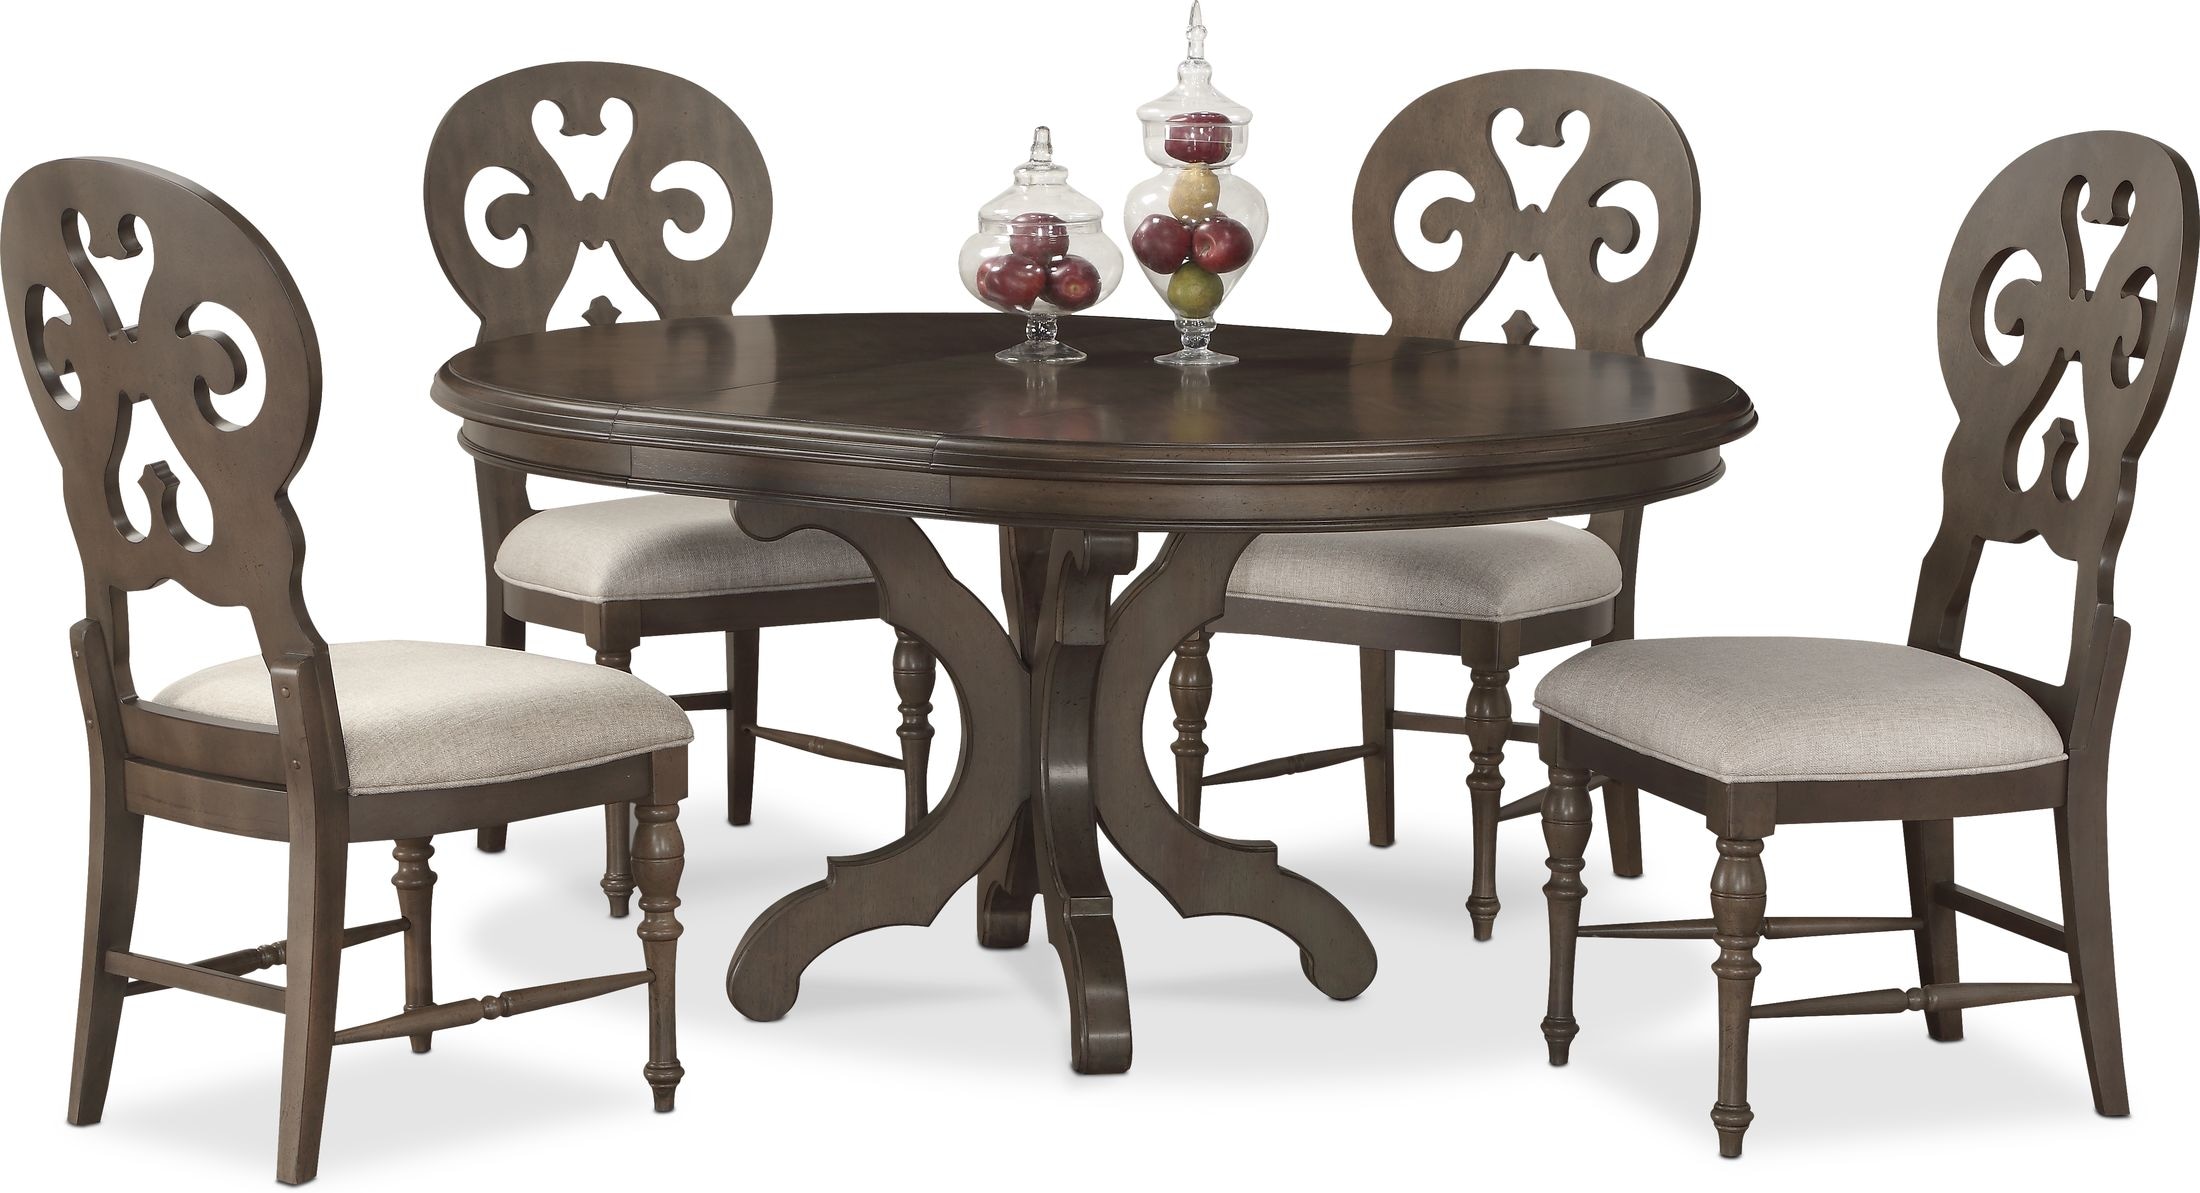 Value City Dining Table - Shiloh Dining Table Bench And 4 Dining Chairs